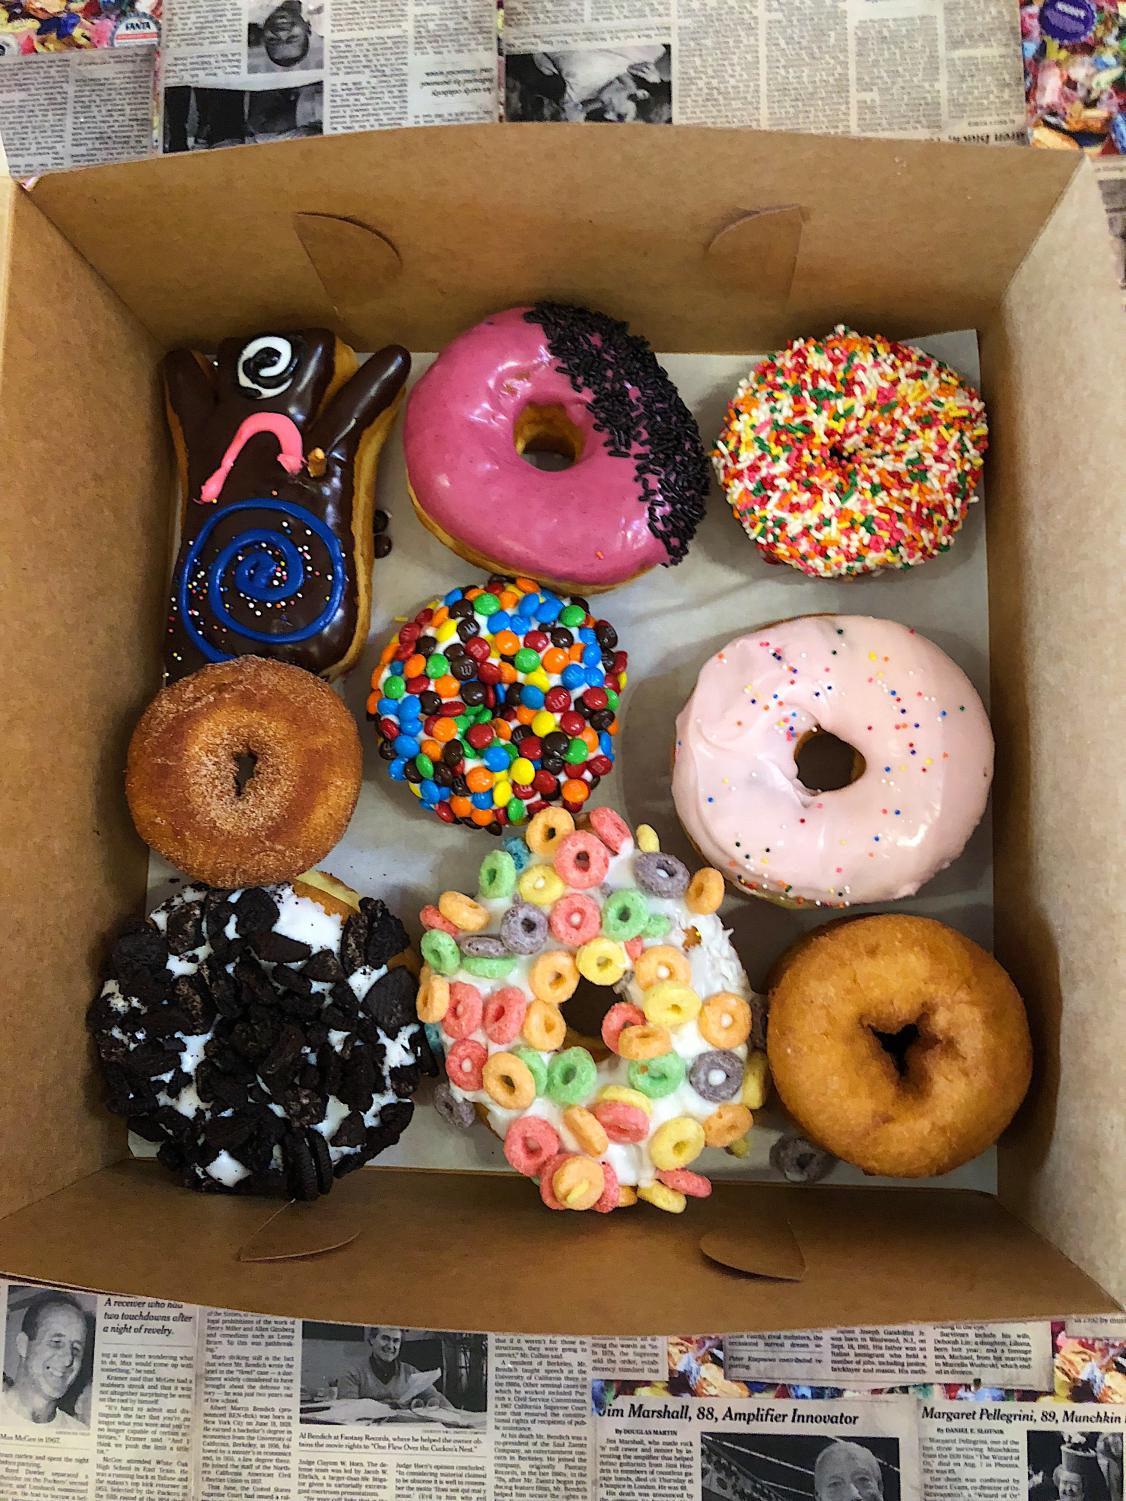 Voodoo+Doughnuts%3A+An+Authentic+Austin+Experience